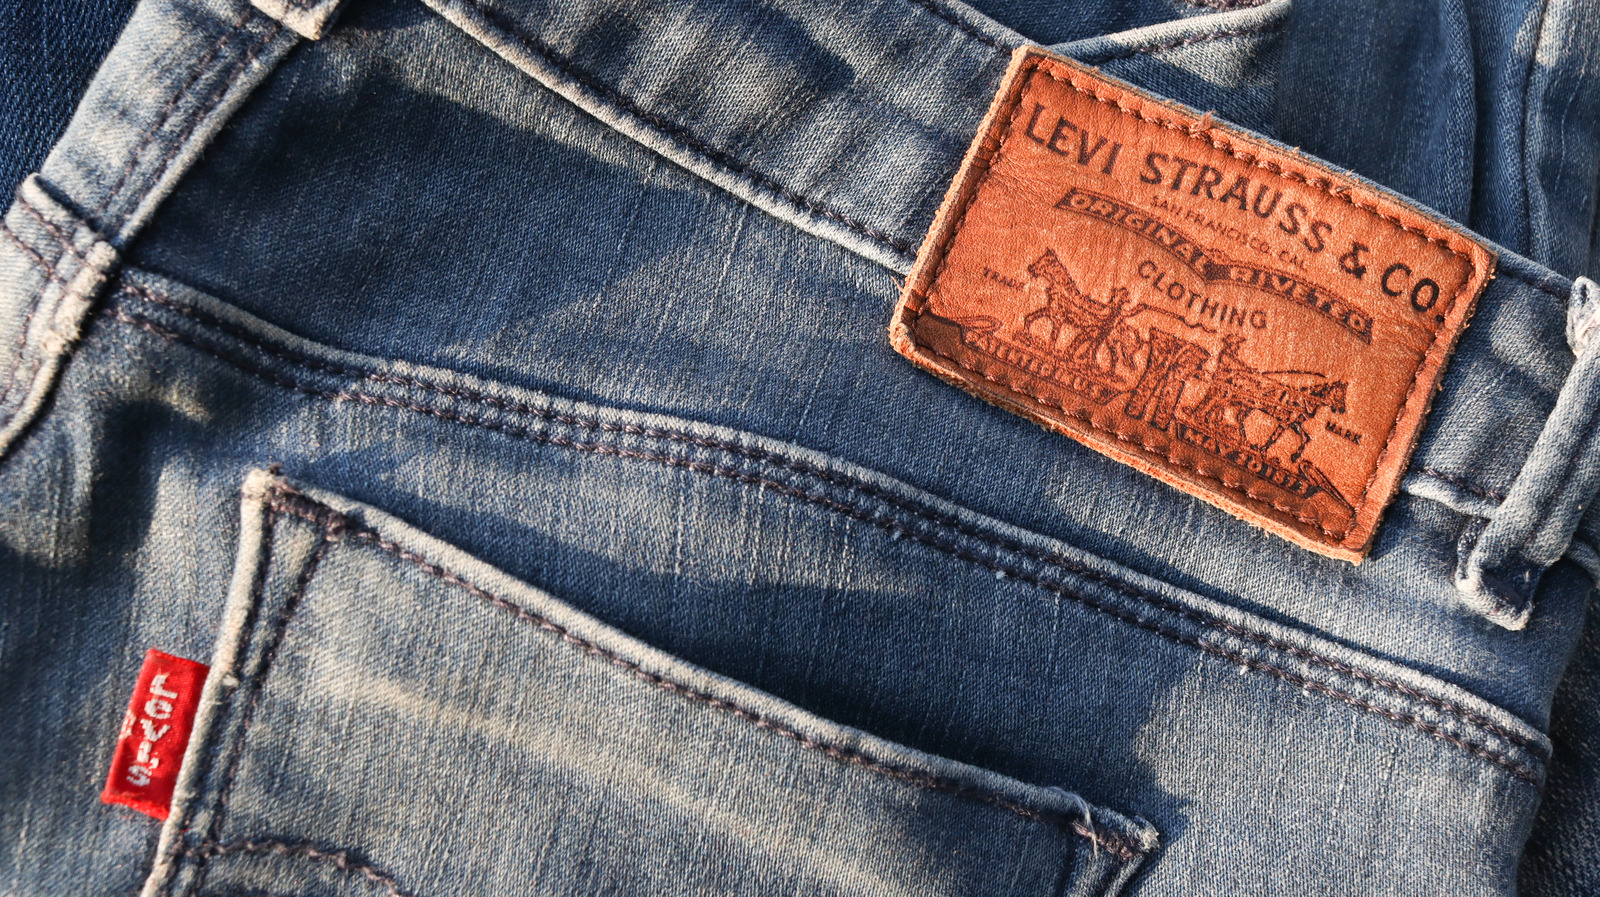 A Stylish Pair Of Levi's From The 1880s Fetched A Staggering Amount At  Auction